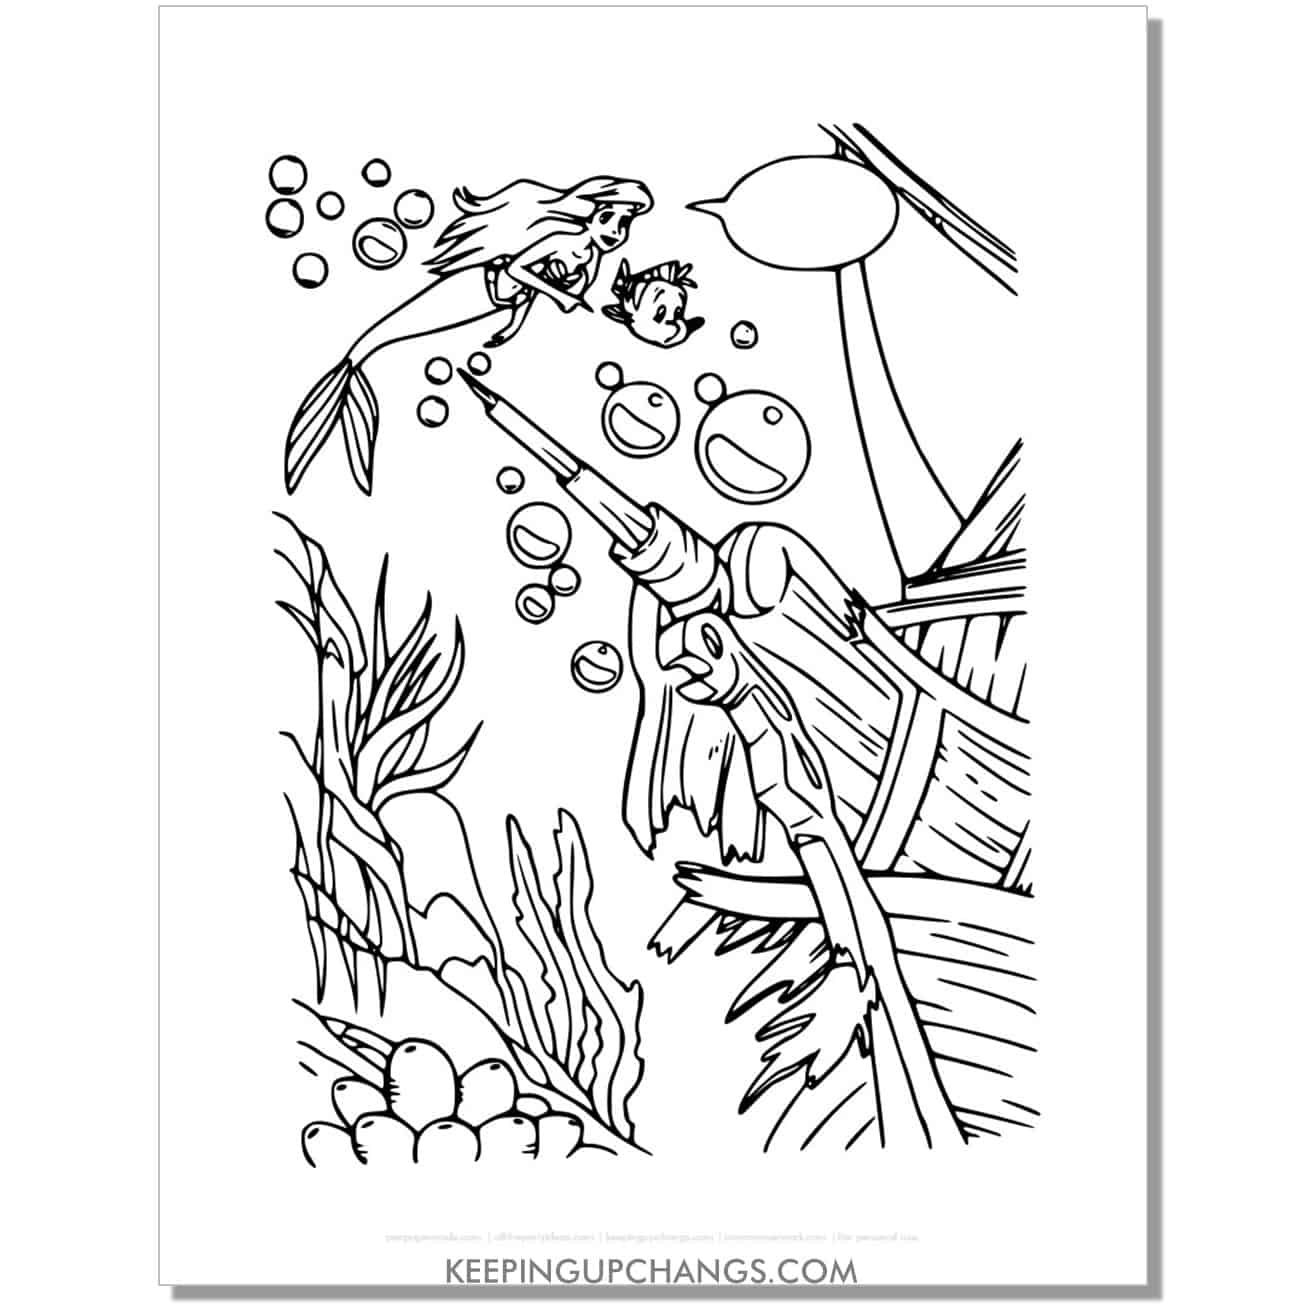 little mermaid ariel, flounder find shipwreck coloring page, sheet.